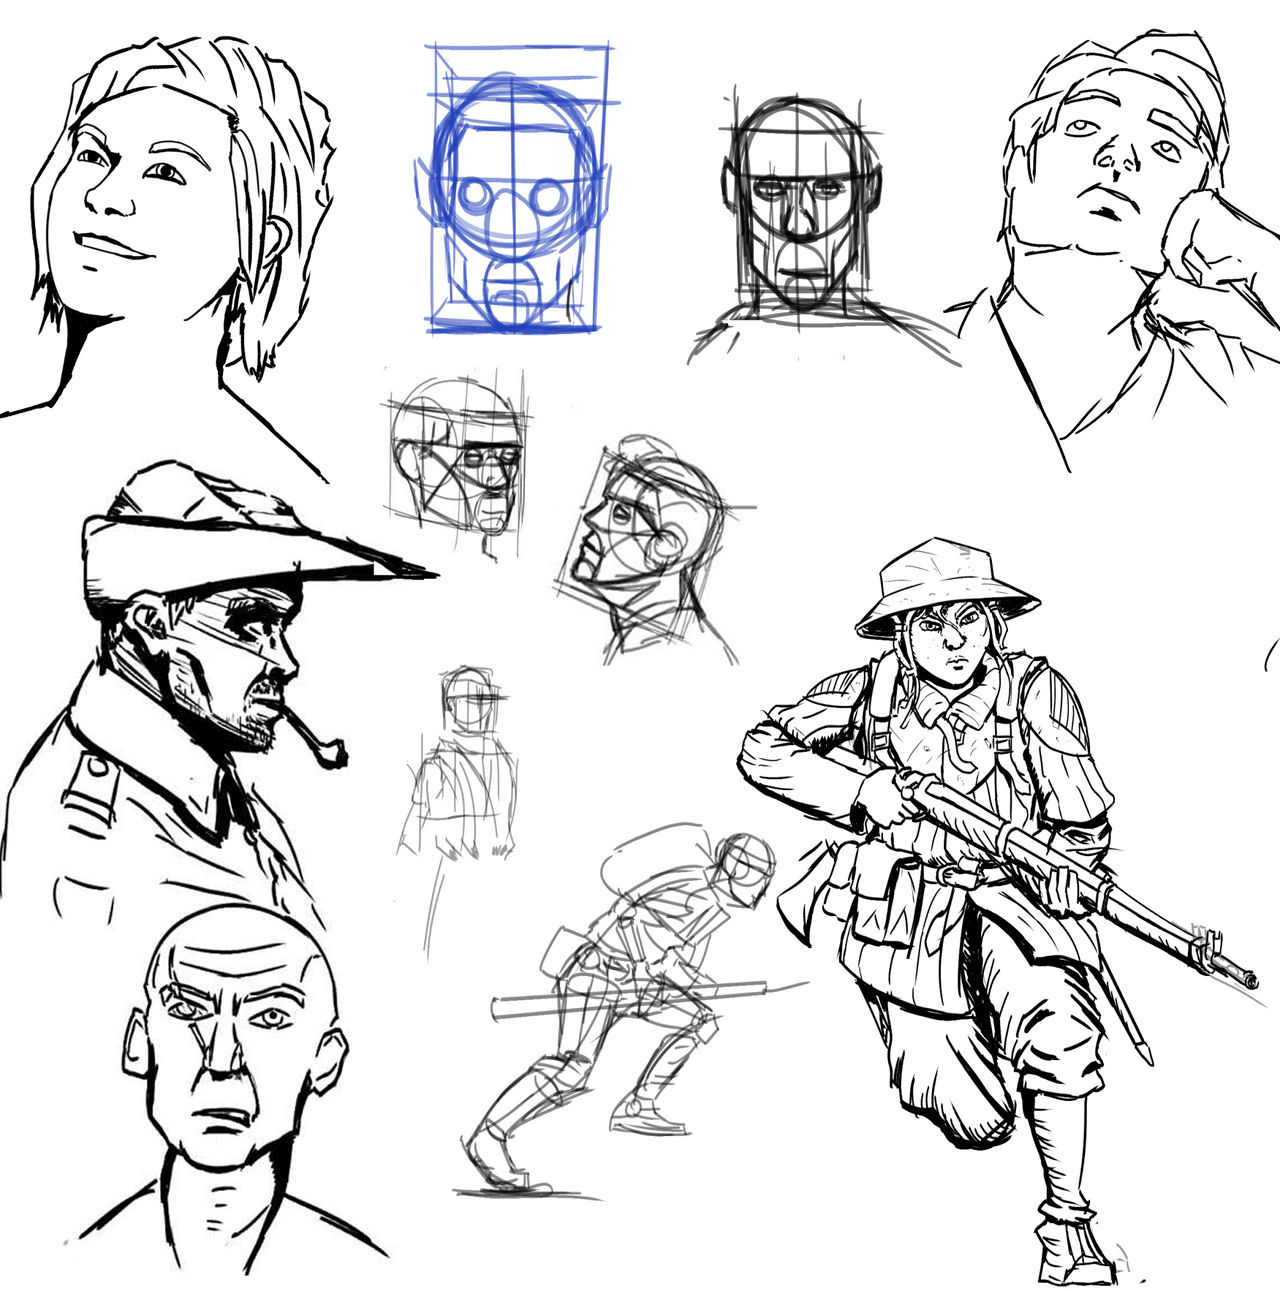 sketches n' drawings n' stuff by YourLocalTechpriest on DeviantArt